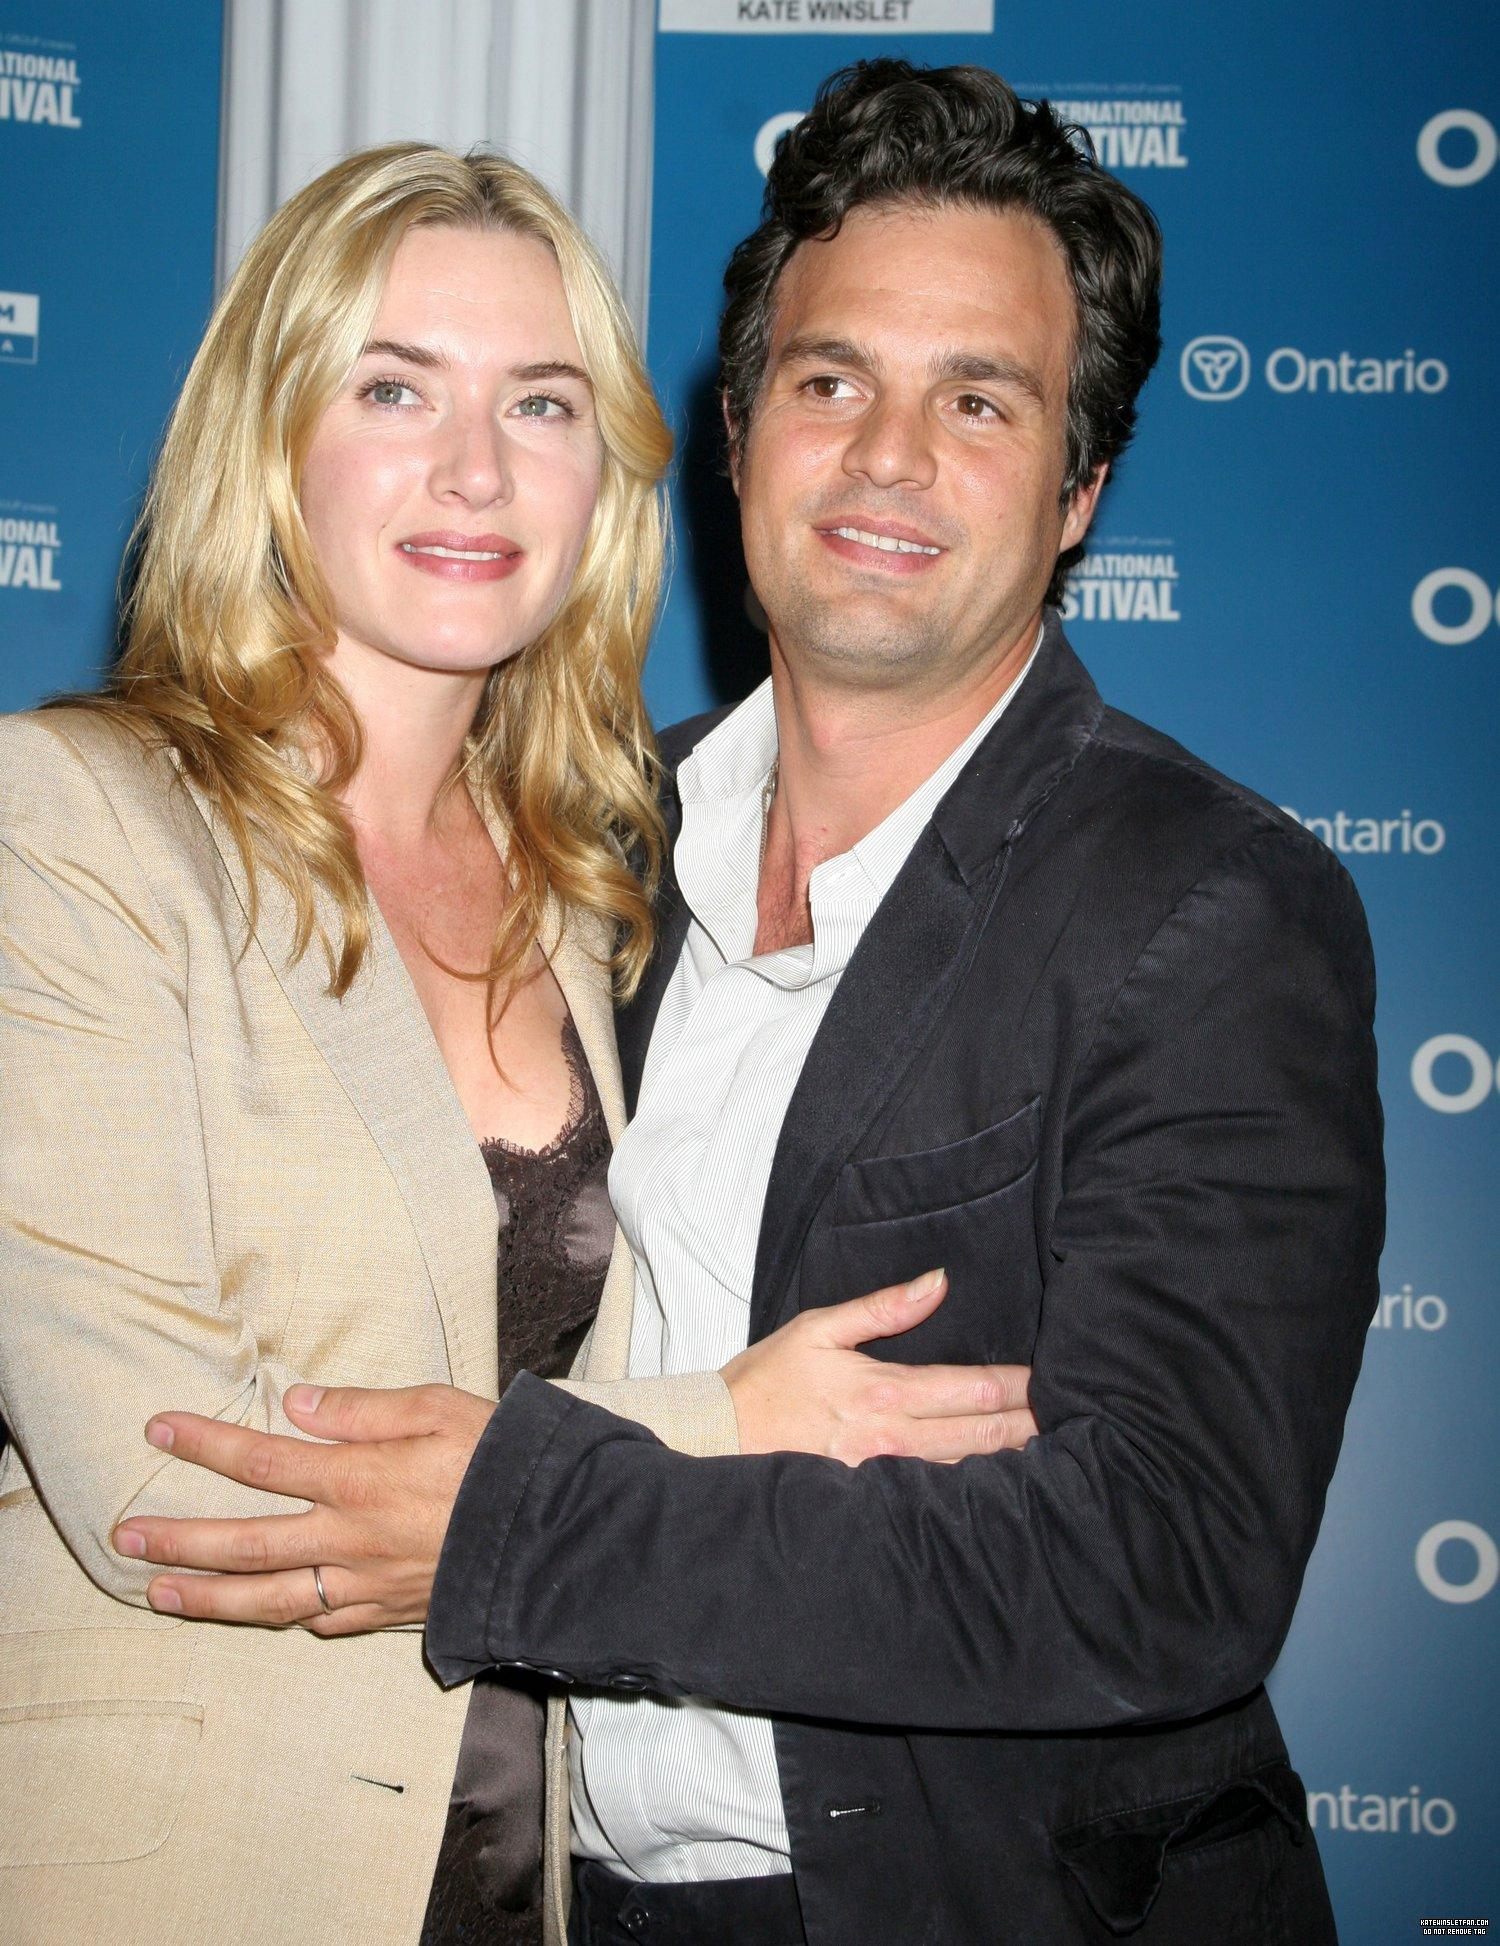 31st-annual-tiff_all-the-kings-men-press-conference_045.jpg